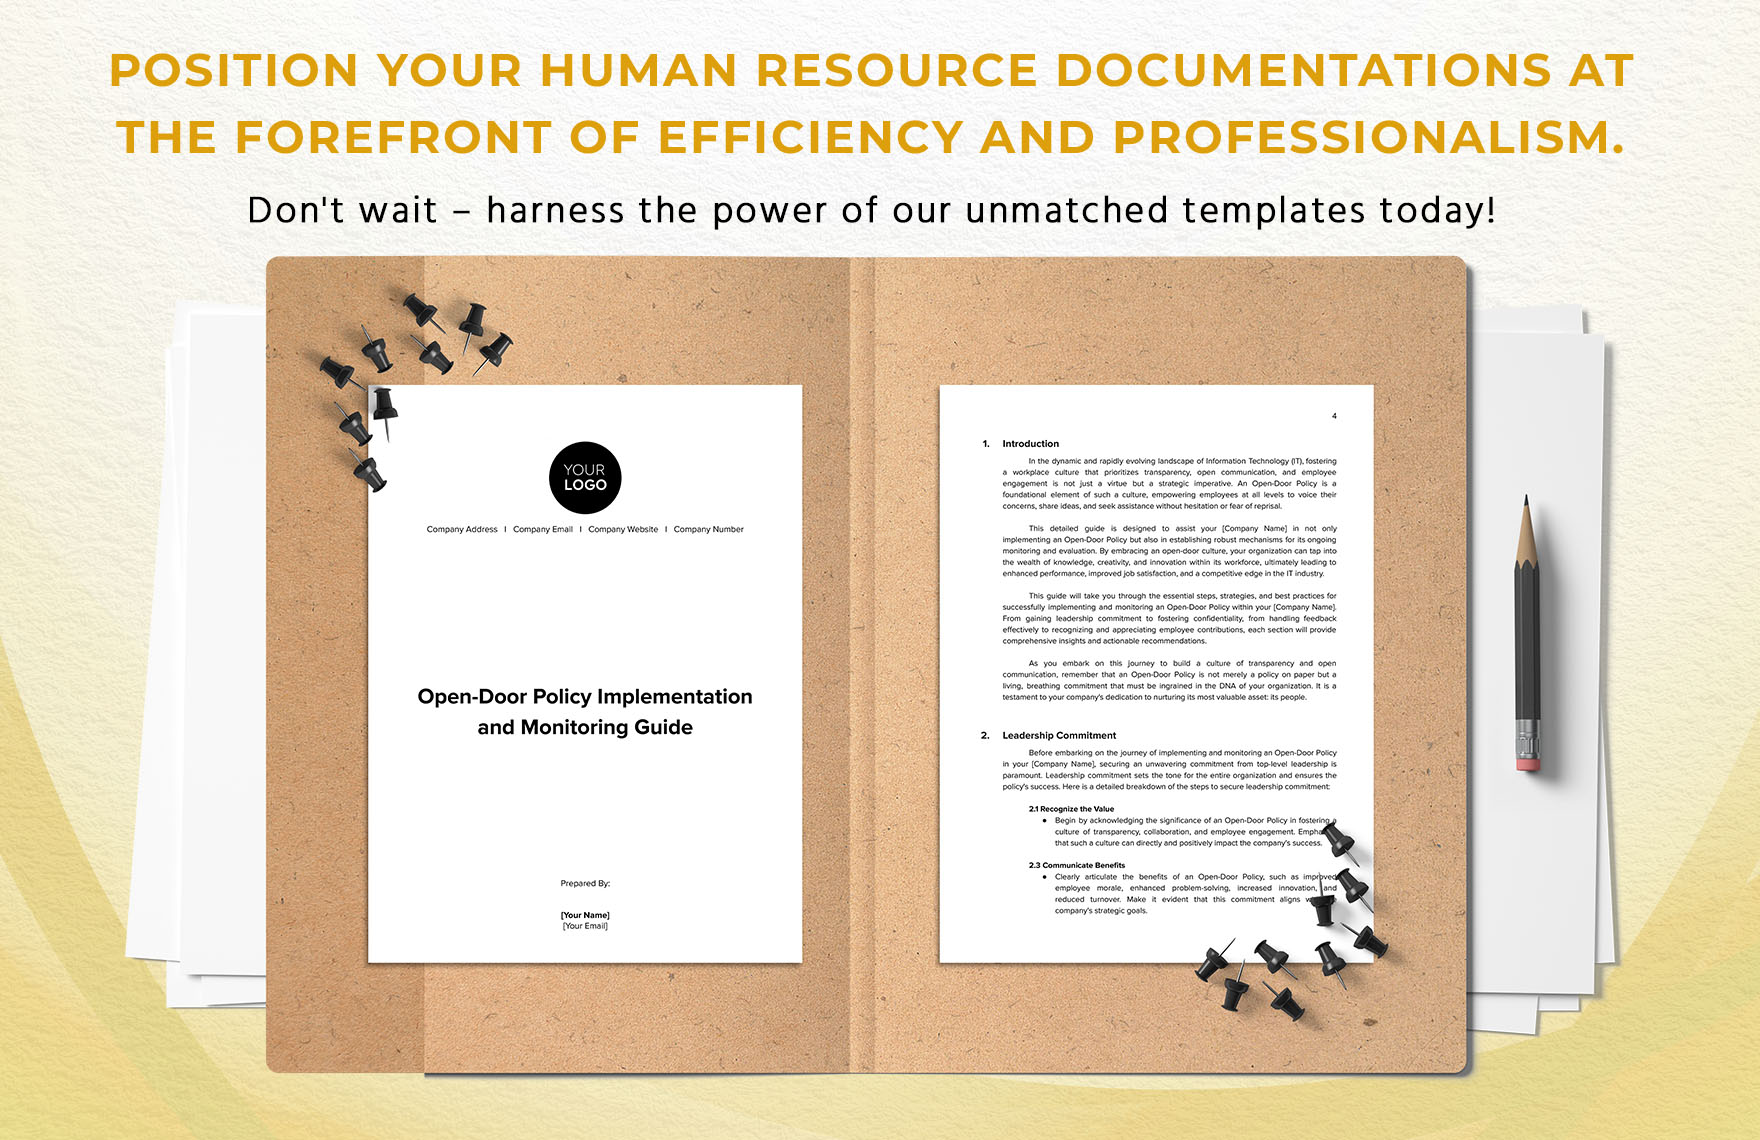 Open-door Policy Implementation and Monitoring Guide HR Template